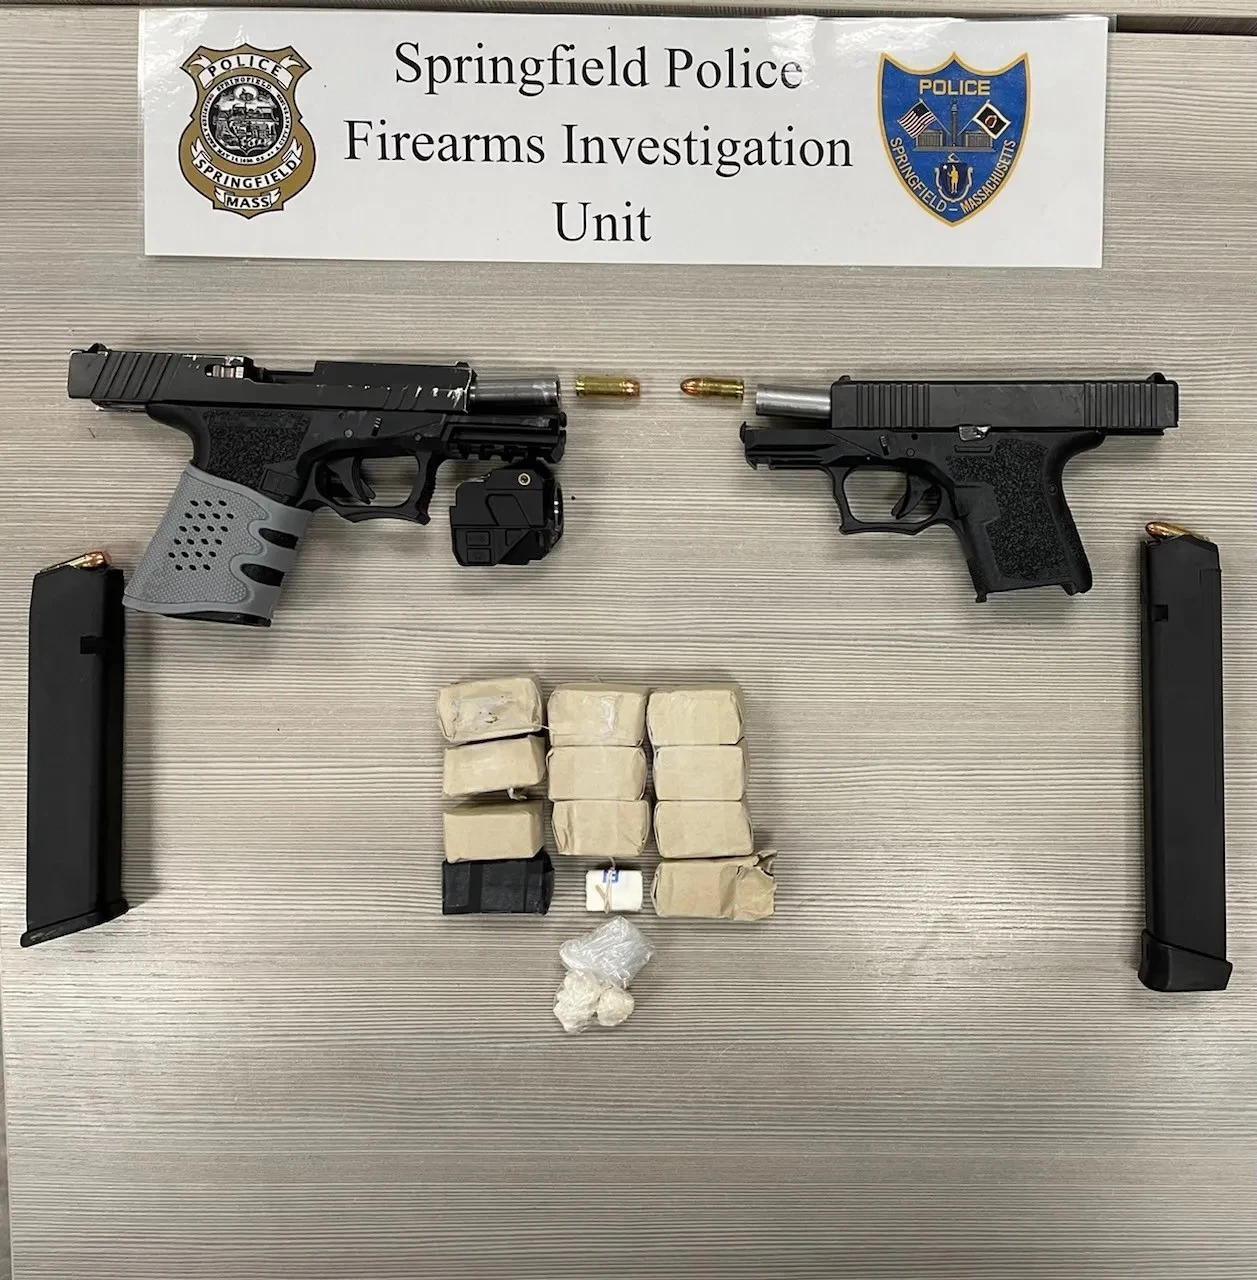 Western MA Police Seize Ghost Guns and Drugs During Traffic Stop